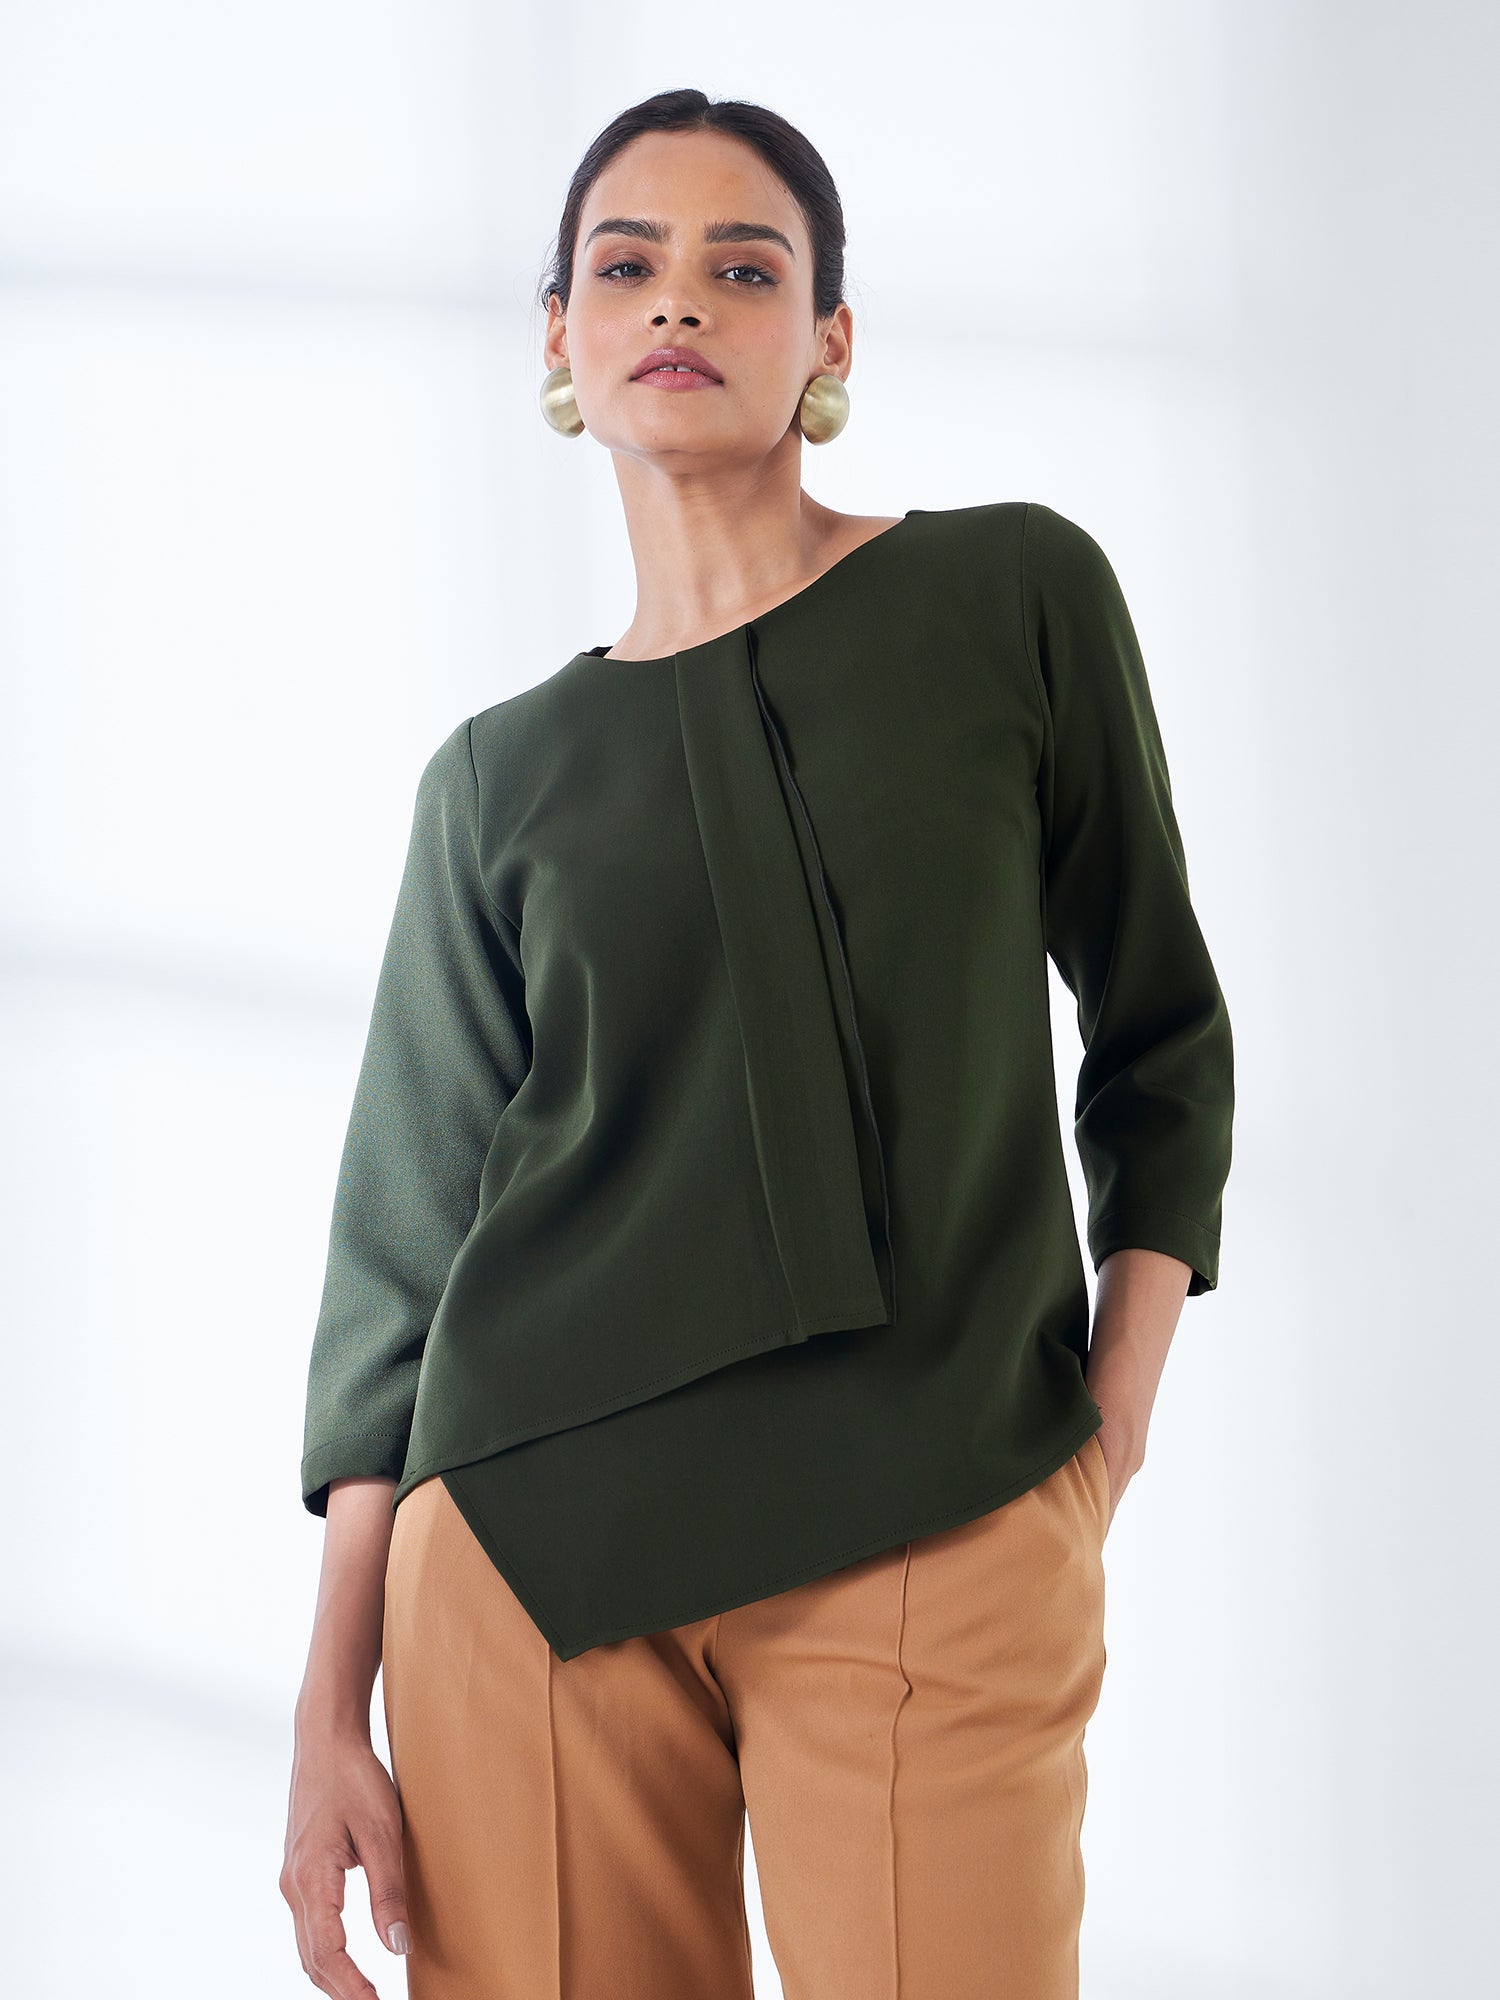 Diplomatic Asymmetric Layered Top-Olive Green